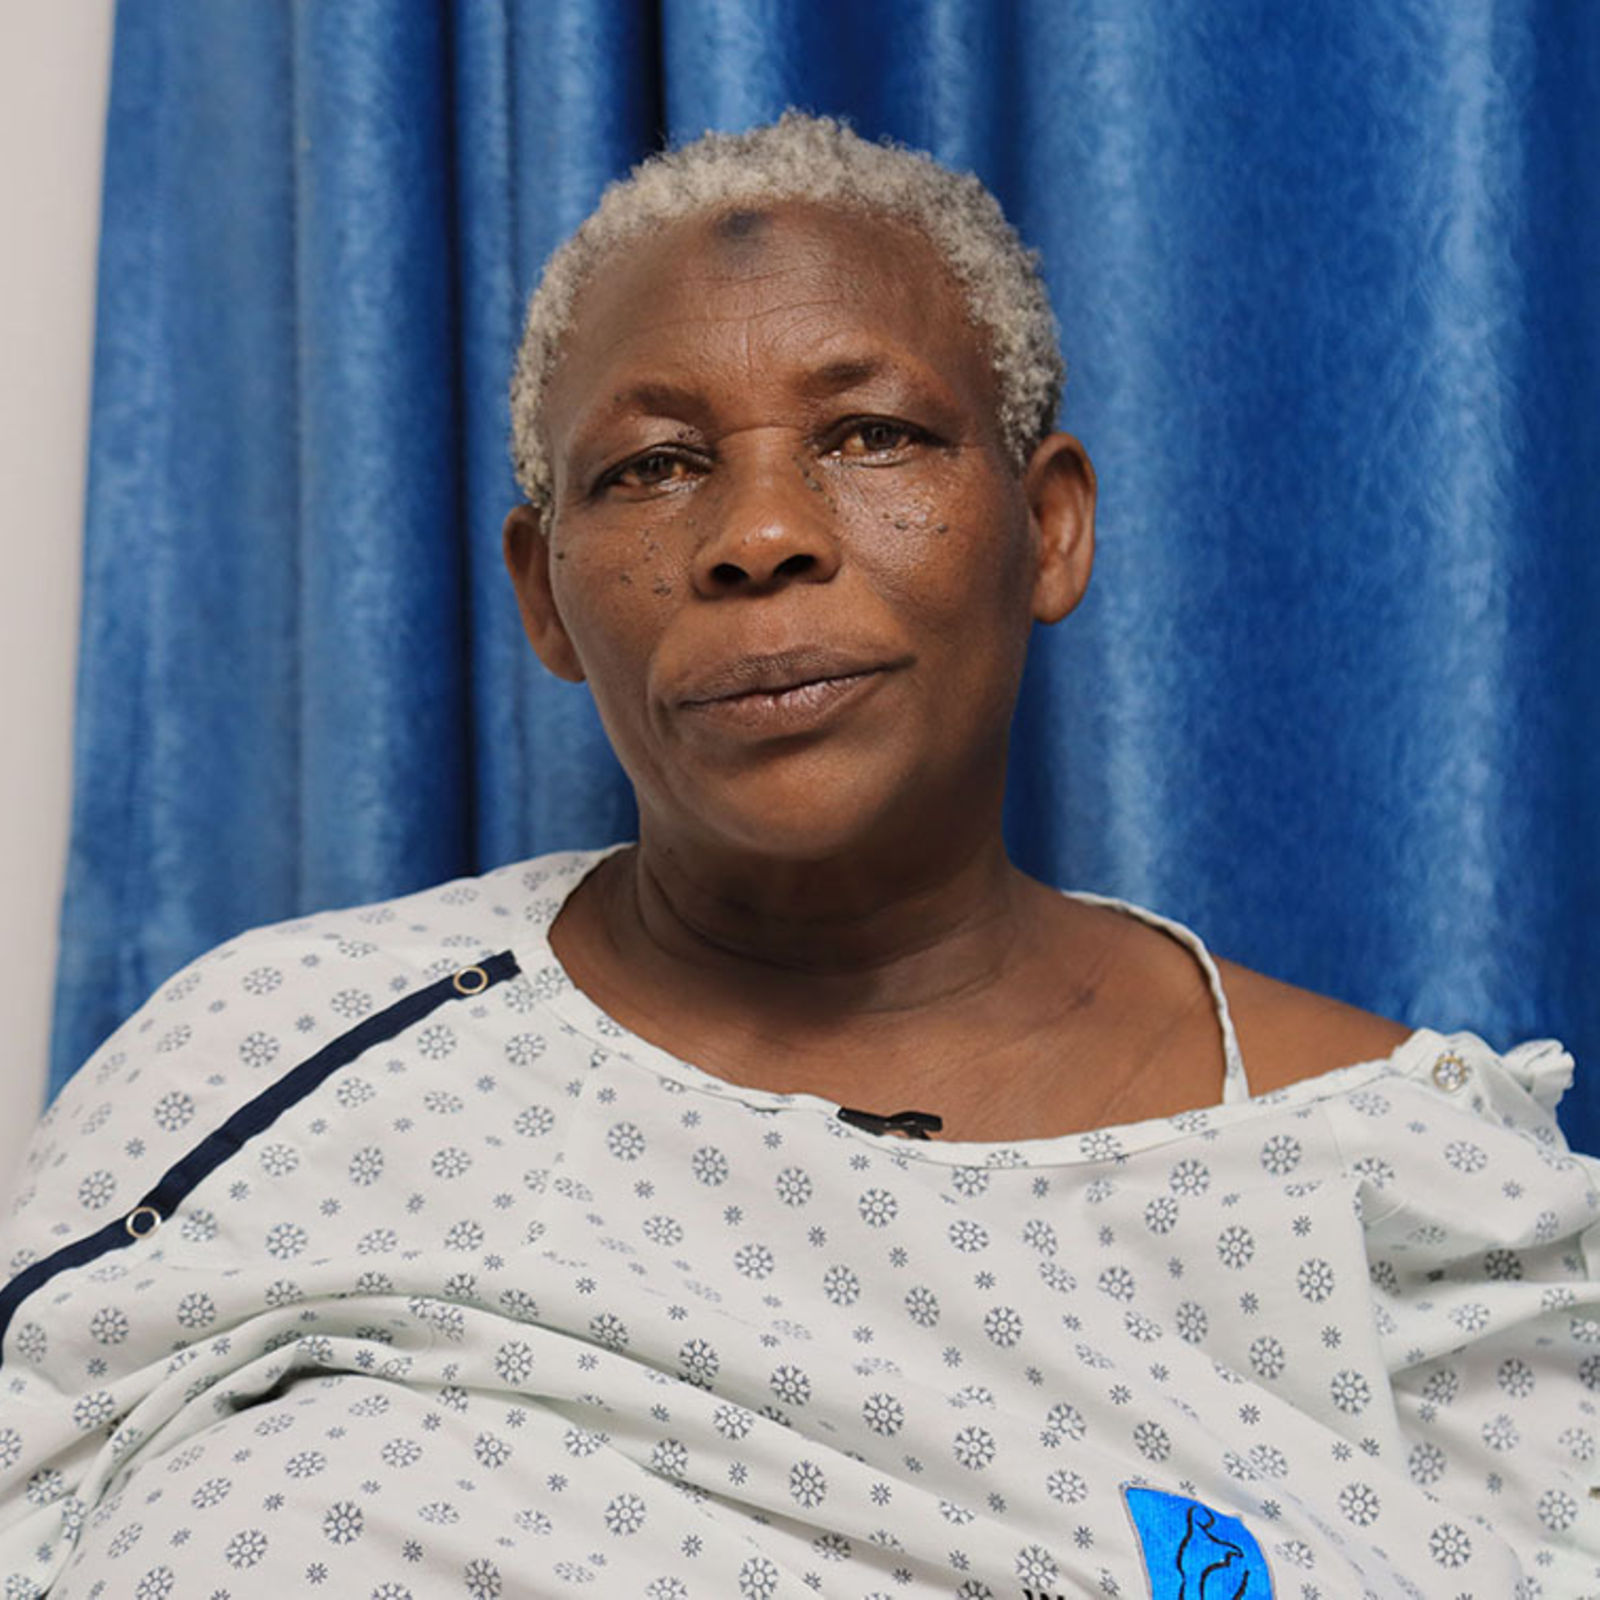 70-year-old woman in Uganda gives birth to twins after getting fertility  treatments